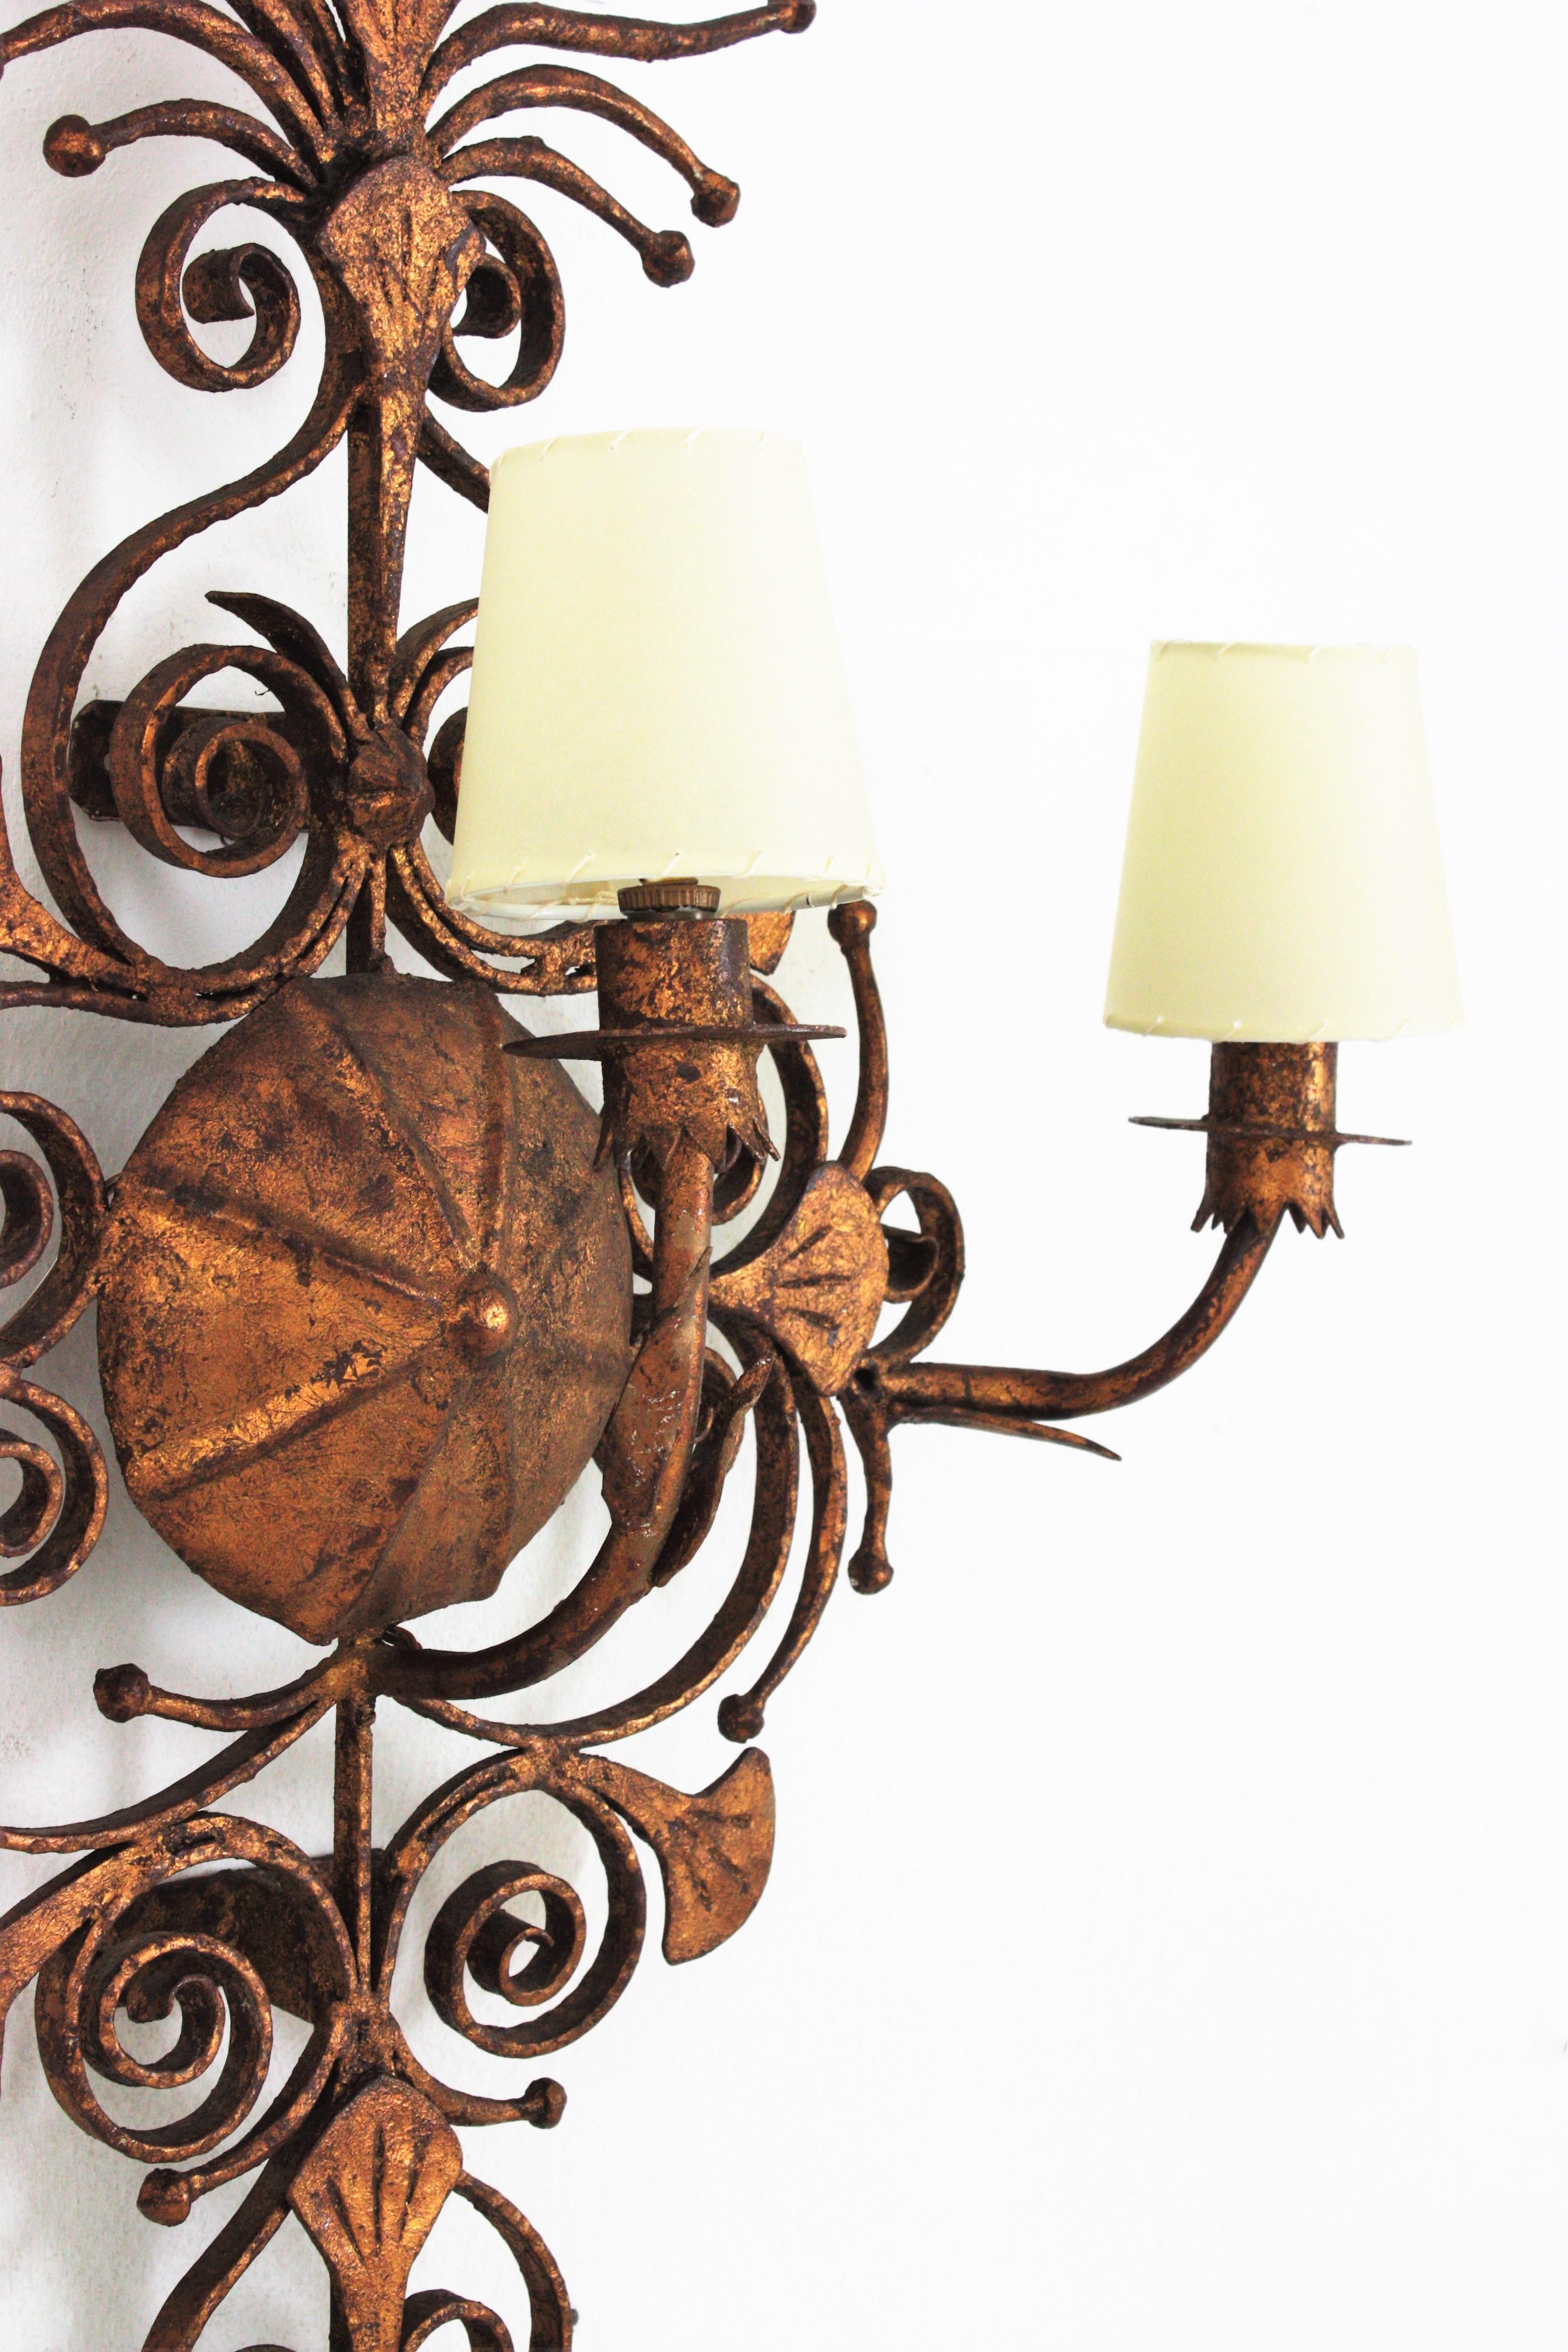 Spanish Colonial Spanish Revival Scrollwork Large Wall Sconce in Gilt Wrought Iron